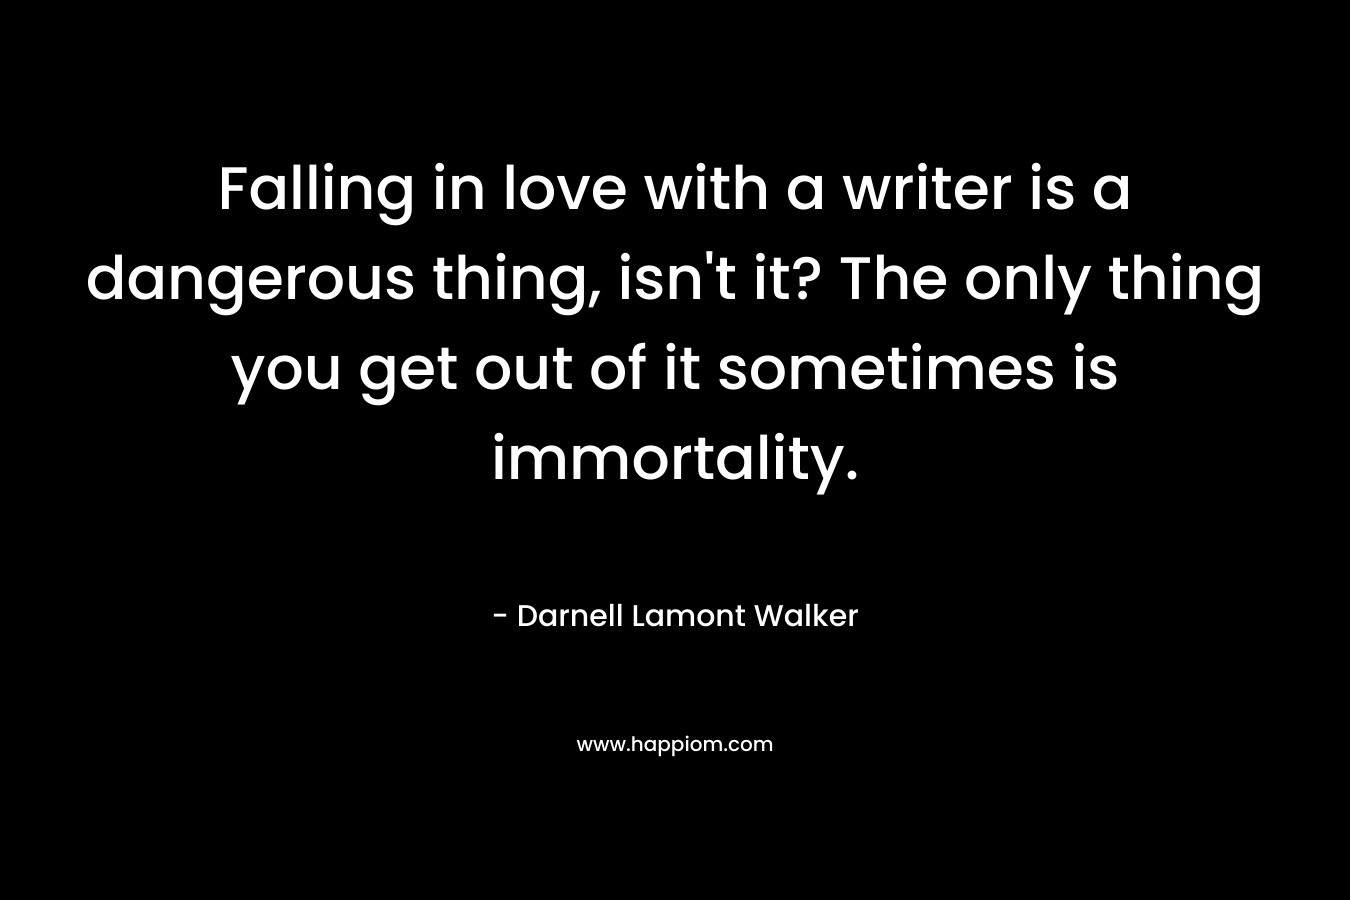 Falling in love with a writer is a dangerous thing, isn't it? The only thing you get out of it sometimes is immortality.